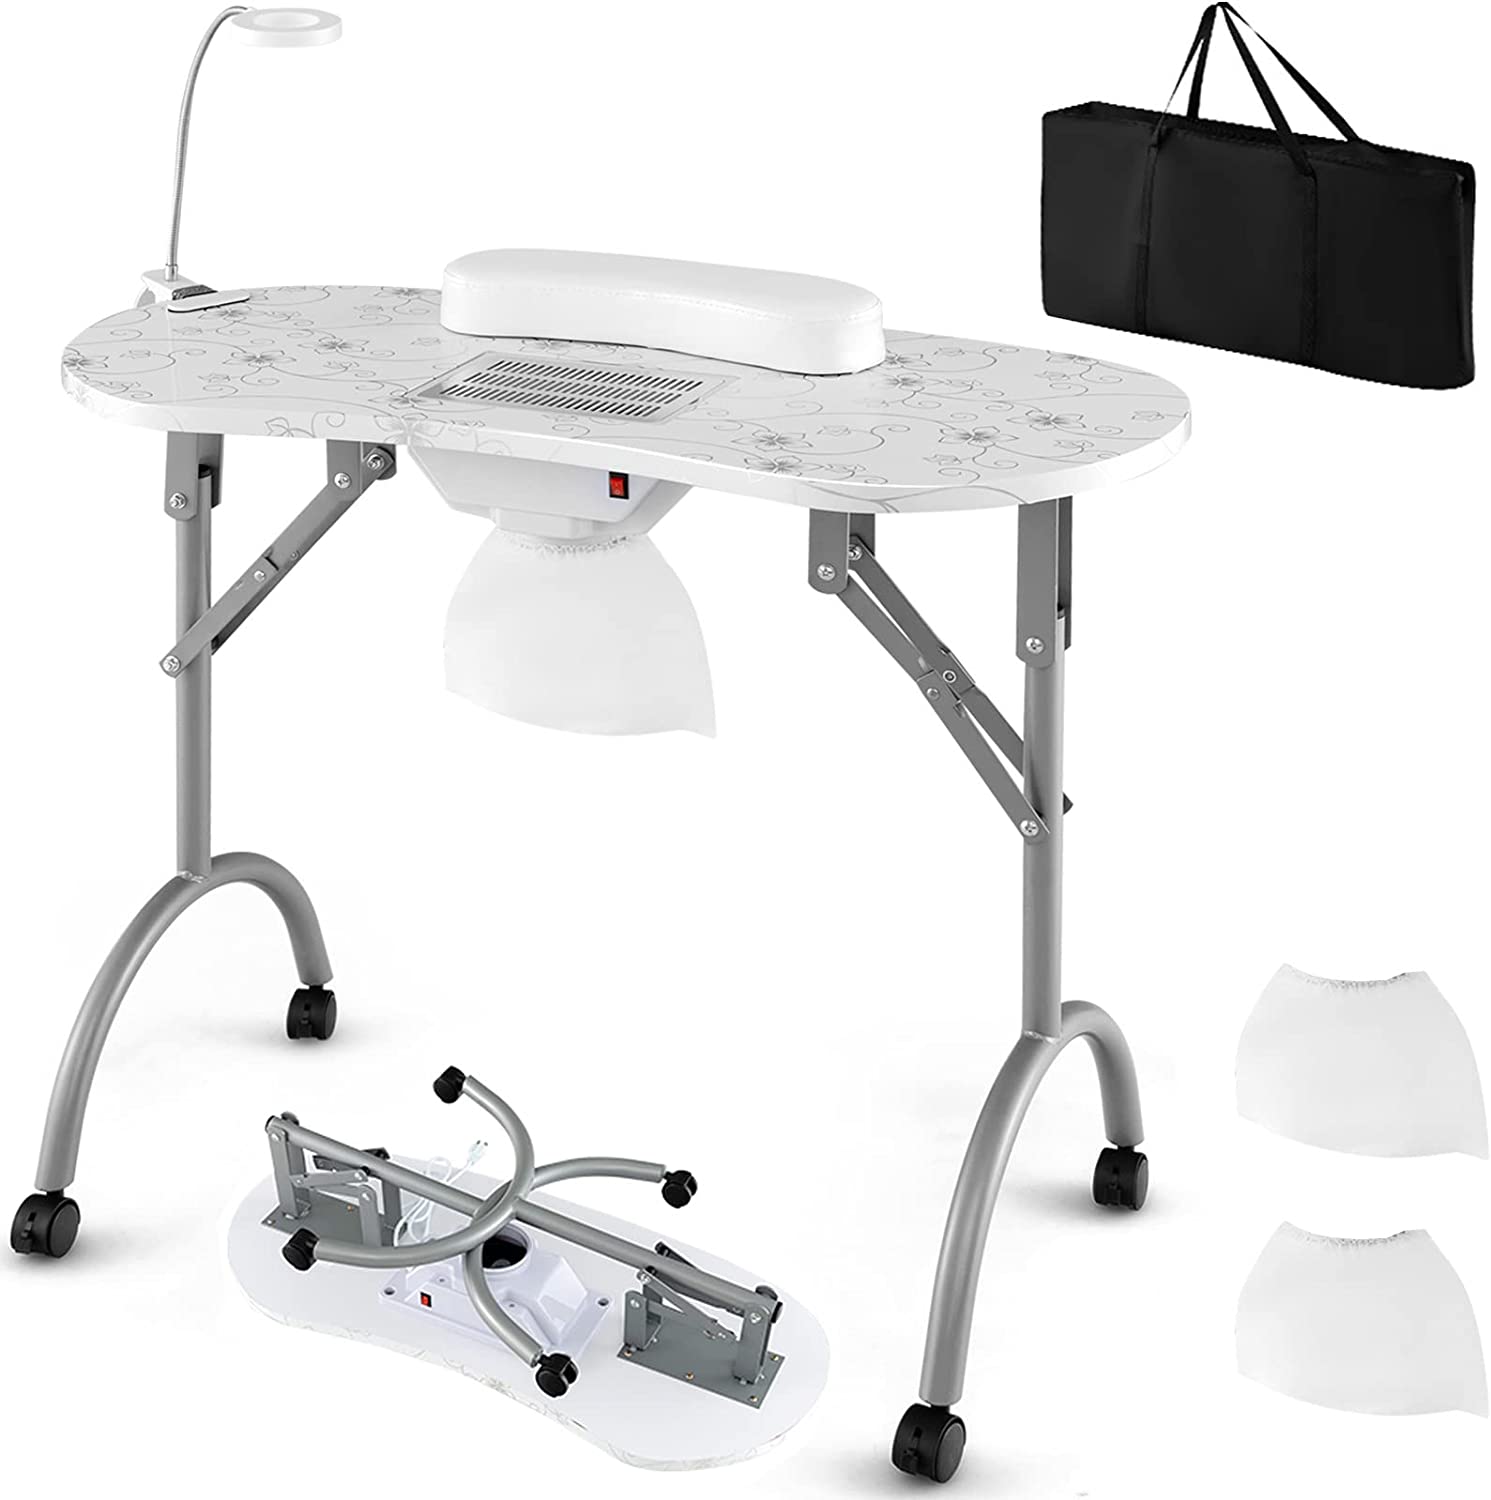 Giantex Nail Desk with Electric Dust Collector, Portable Manicure Table with USB-Plug LED Table Lamp